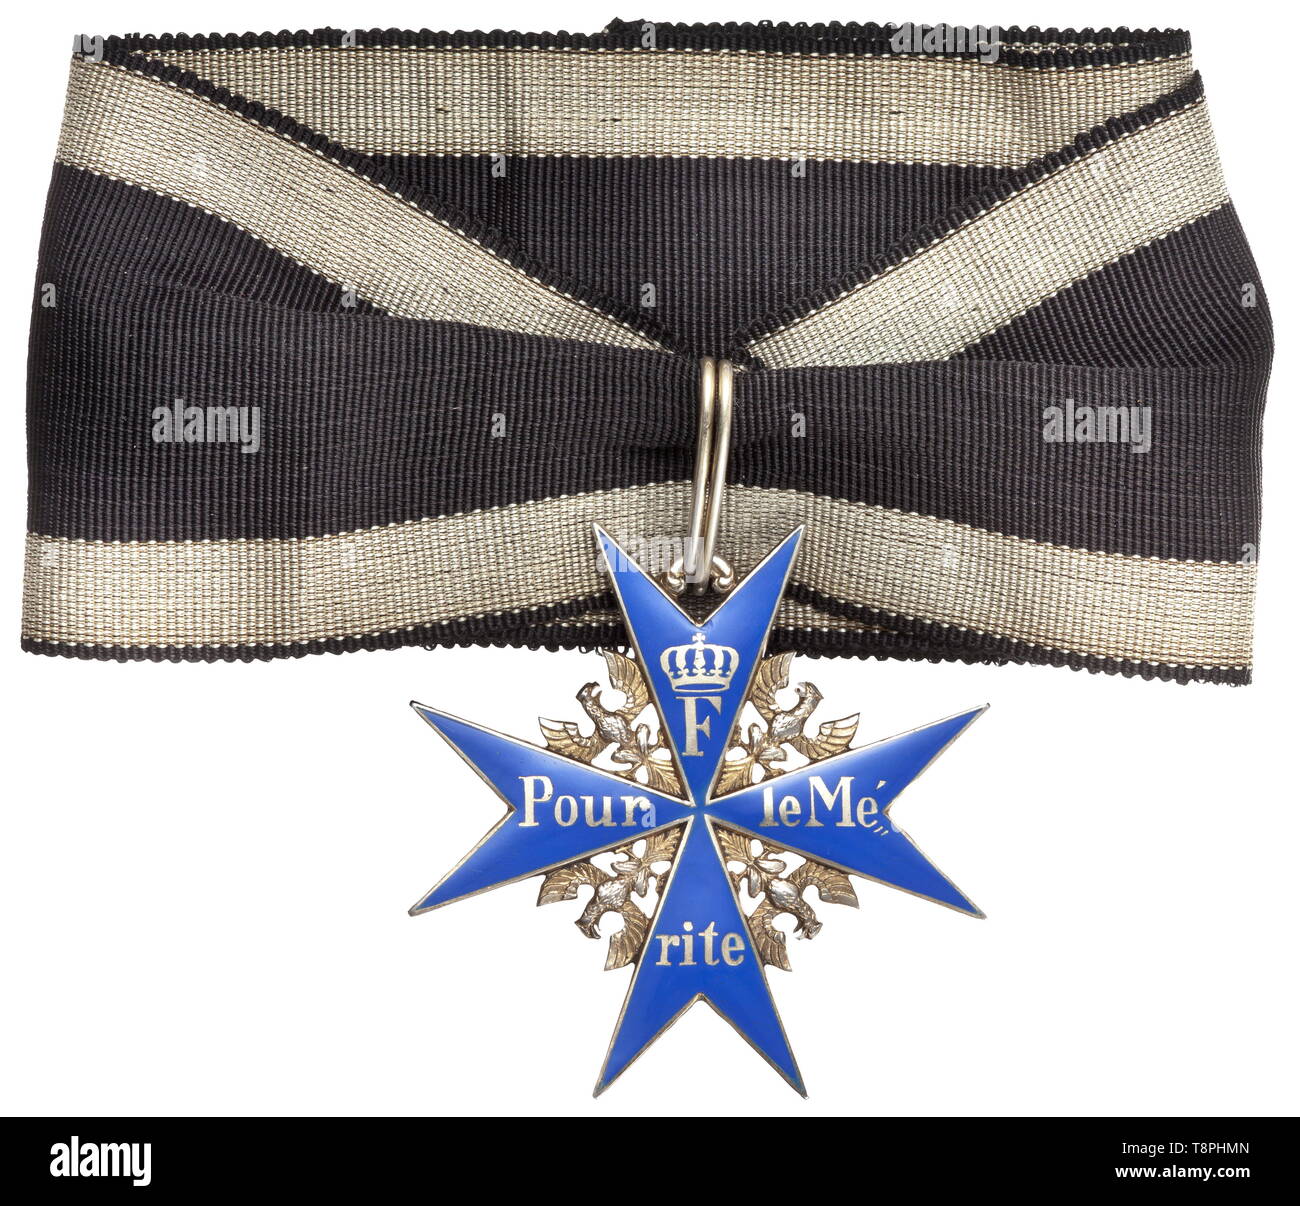 https://c8.alamy.com/comp/T8PHMN/pour-le-mrite-a-cross-of-the-order-from-world-war-i-embossed-neck-cross-made-of-gilt-silver-by-johann-wagner-sons-in-berlin-blue-enamelled-on-the-long-original-ribbon-customised-for-wear-the-solidly-worked-decoration-from-the-second-half-of-world-war-i-shows-a-flaw-in-the-eagles-wing-at-4-oclock-that-is-characteristic-of-the-manufacturers-friedlnder-and-wagner-and-bears-the-standard-punch-marks-w-and-938-in-the-lower-cross-arm-the-suspension-ring-also-with-mark-of-fineness-800-according-to-the-regulations-the-cross-is-in-a-co-additional-rights-clearance-info-not-available-T8PHMN.jpg